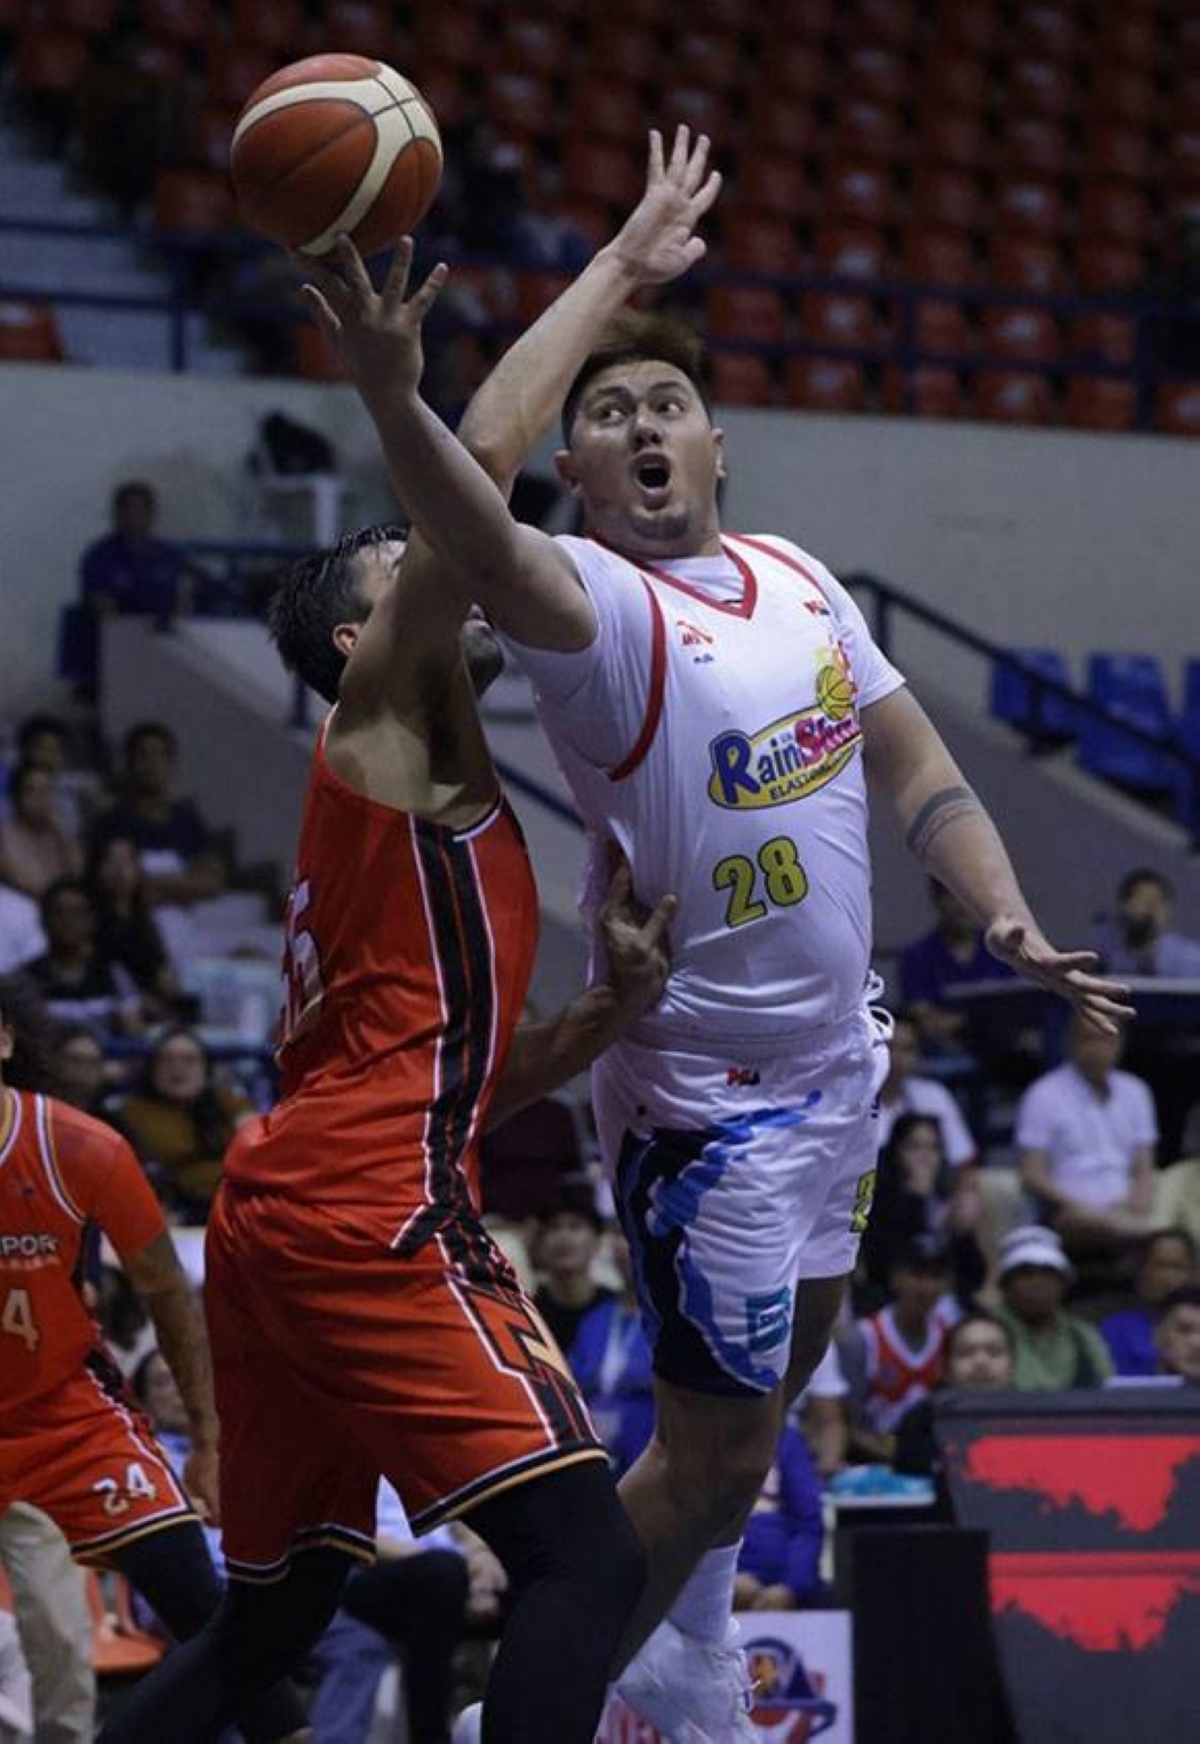 LOYALTY COUNTS Veteran player Beau Belga (right) signs a new contract with Rain or Shine in the Philippine Basketball Association. PBA IMAGE